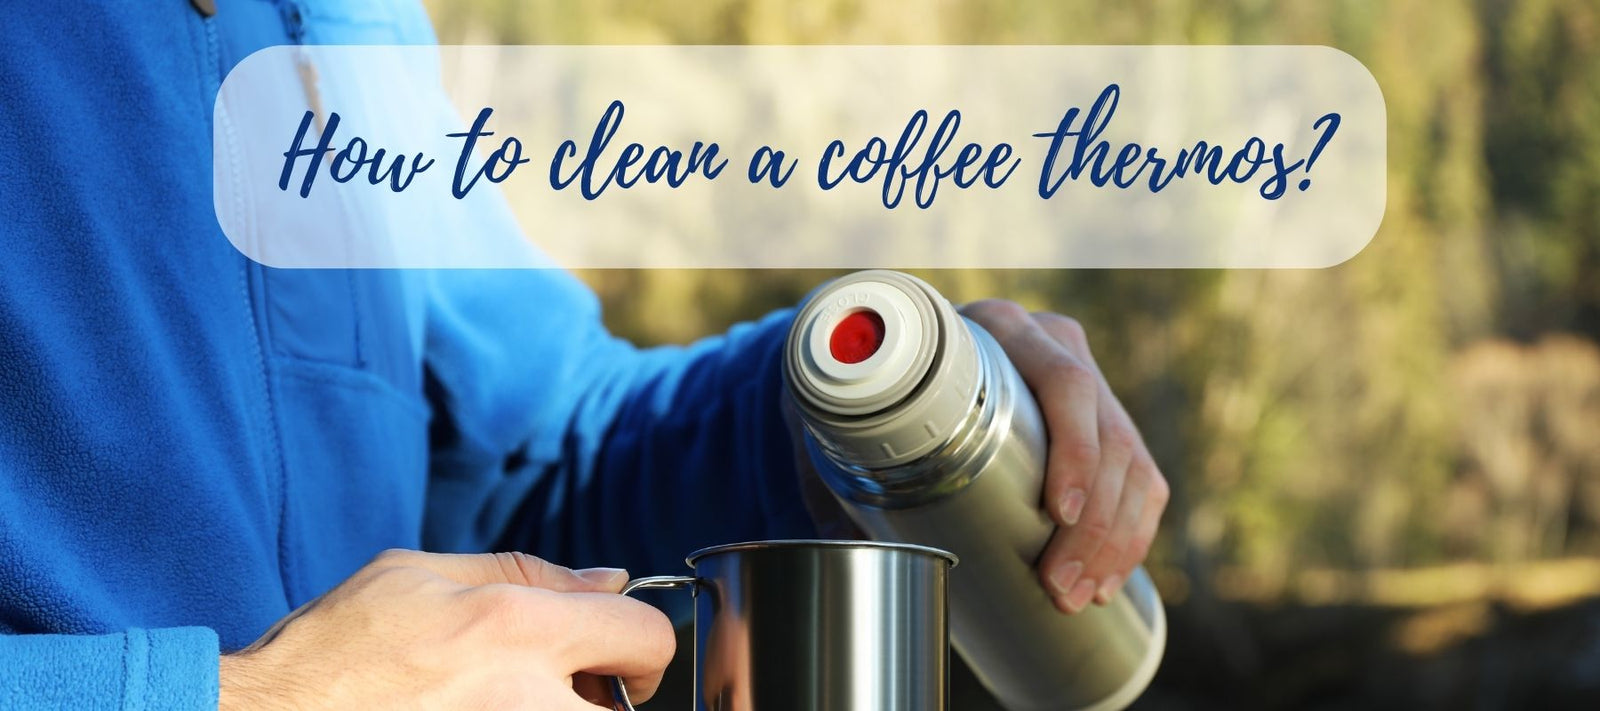 Tea thermos: tips for choosing